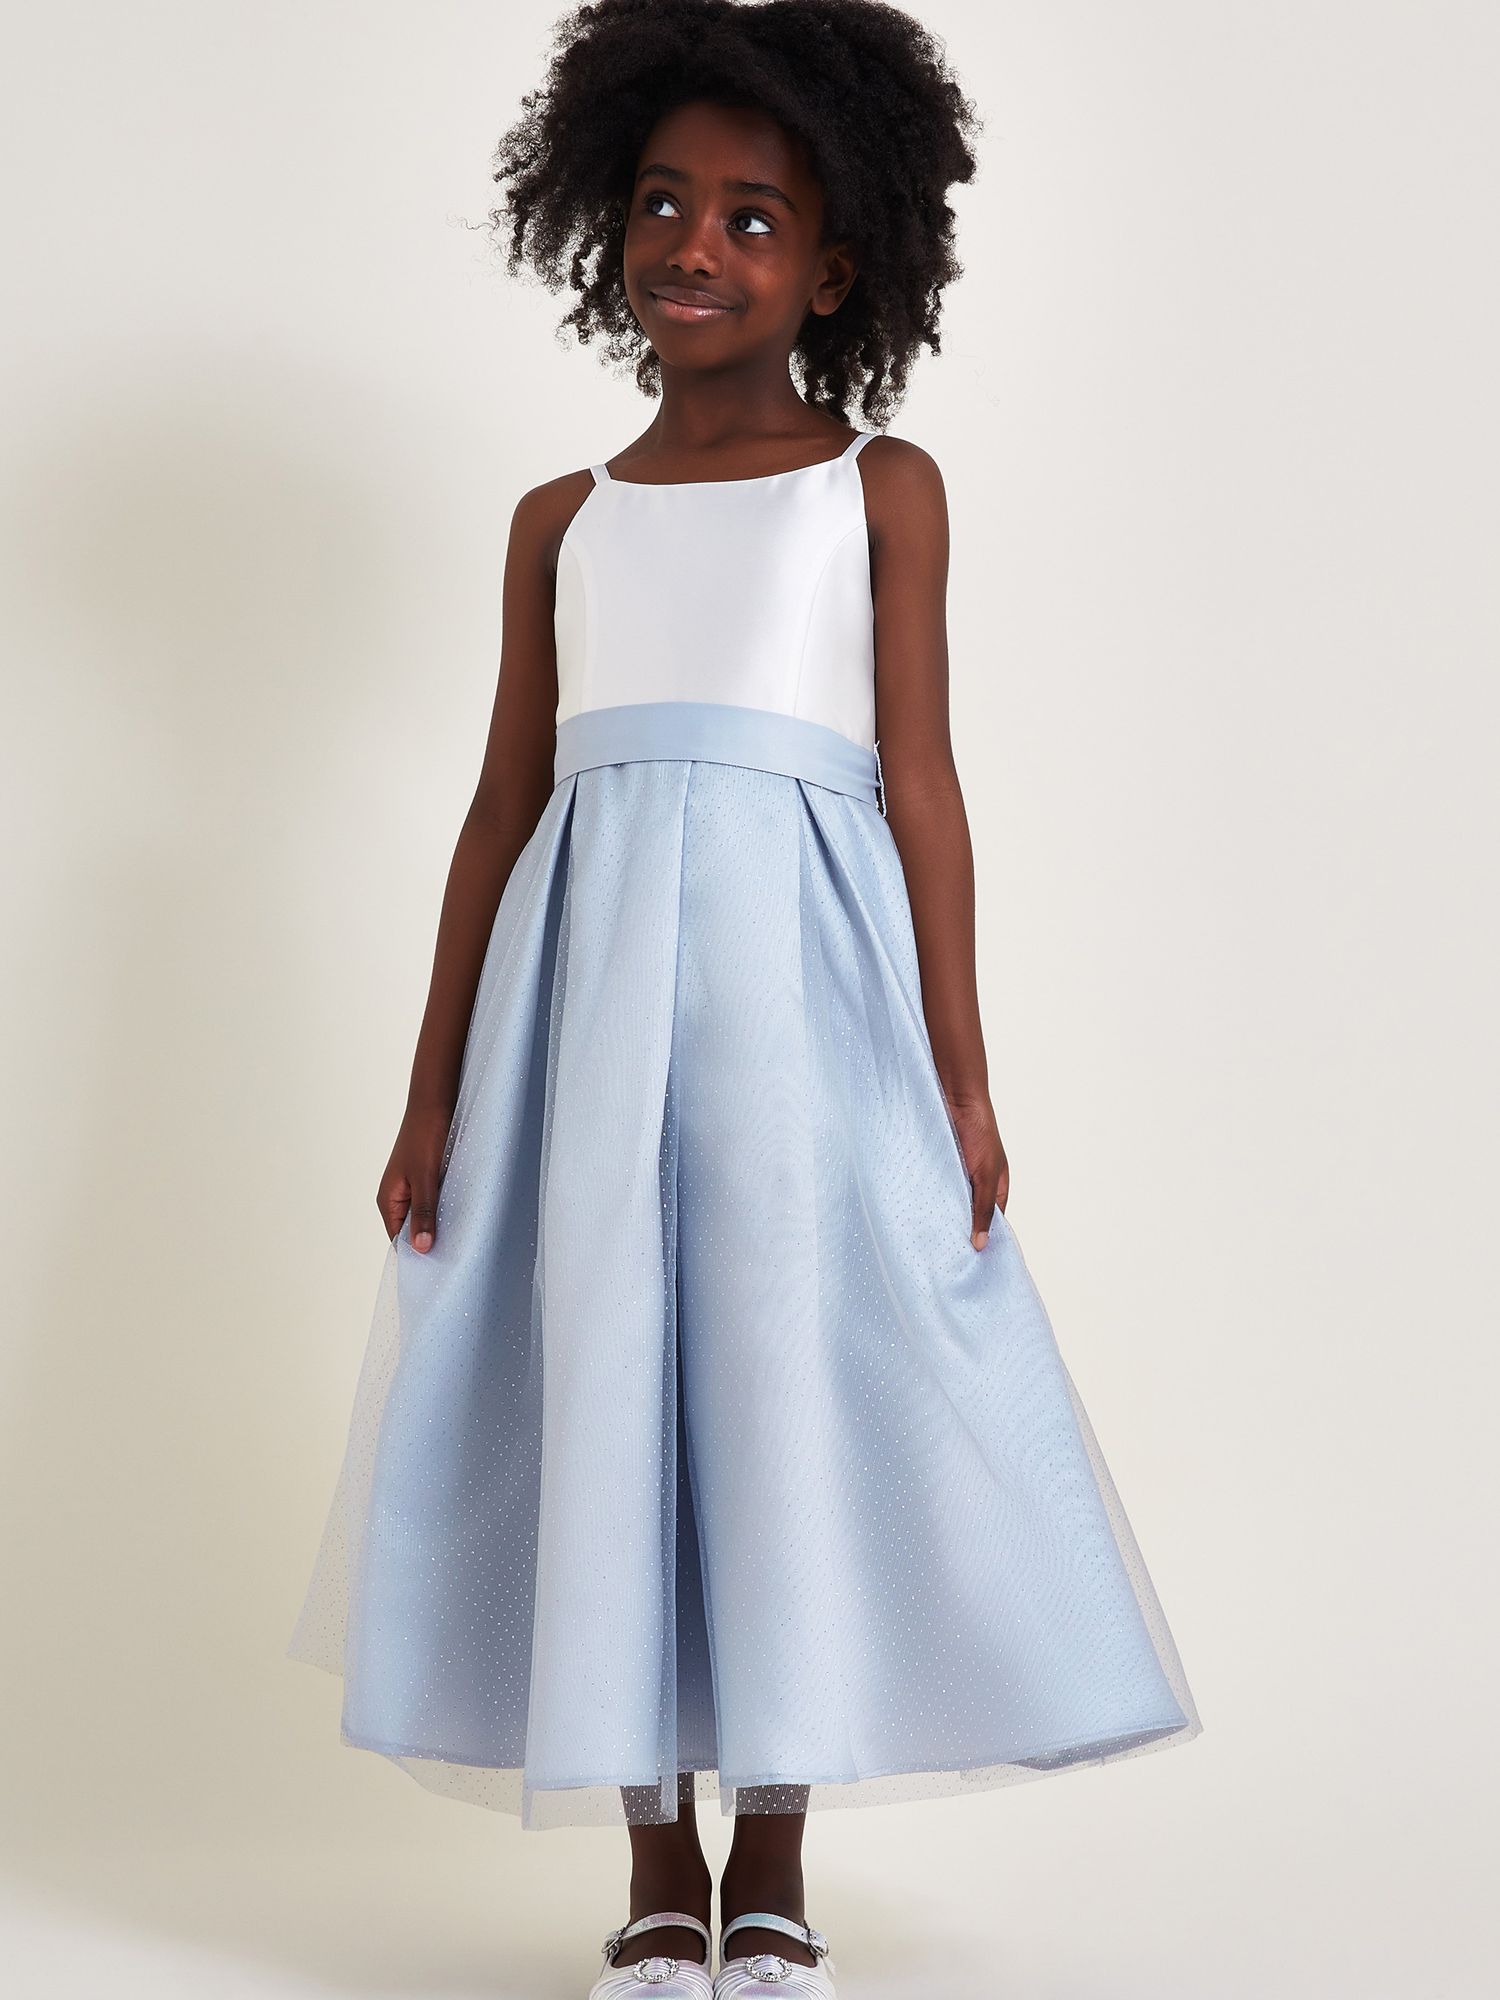 Monsoon Kids' Anastasia Glitter Tulle Bow Occasion Maxi Dress, Pale Blue, 14-15 years